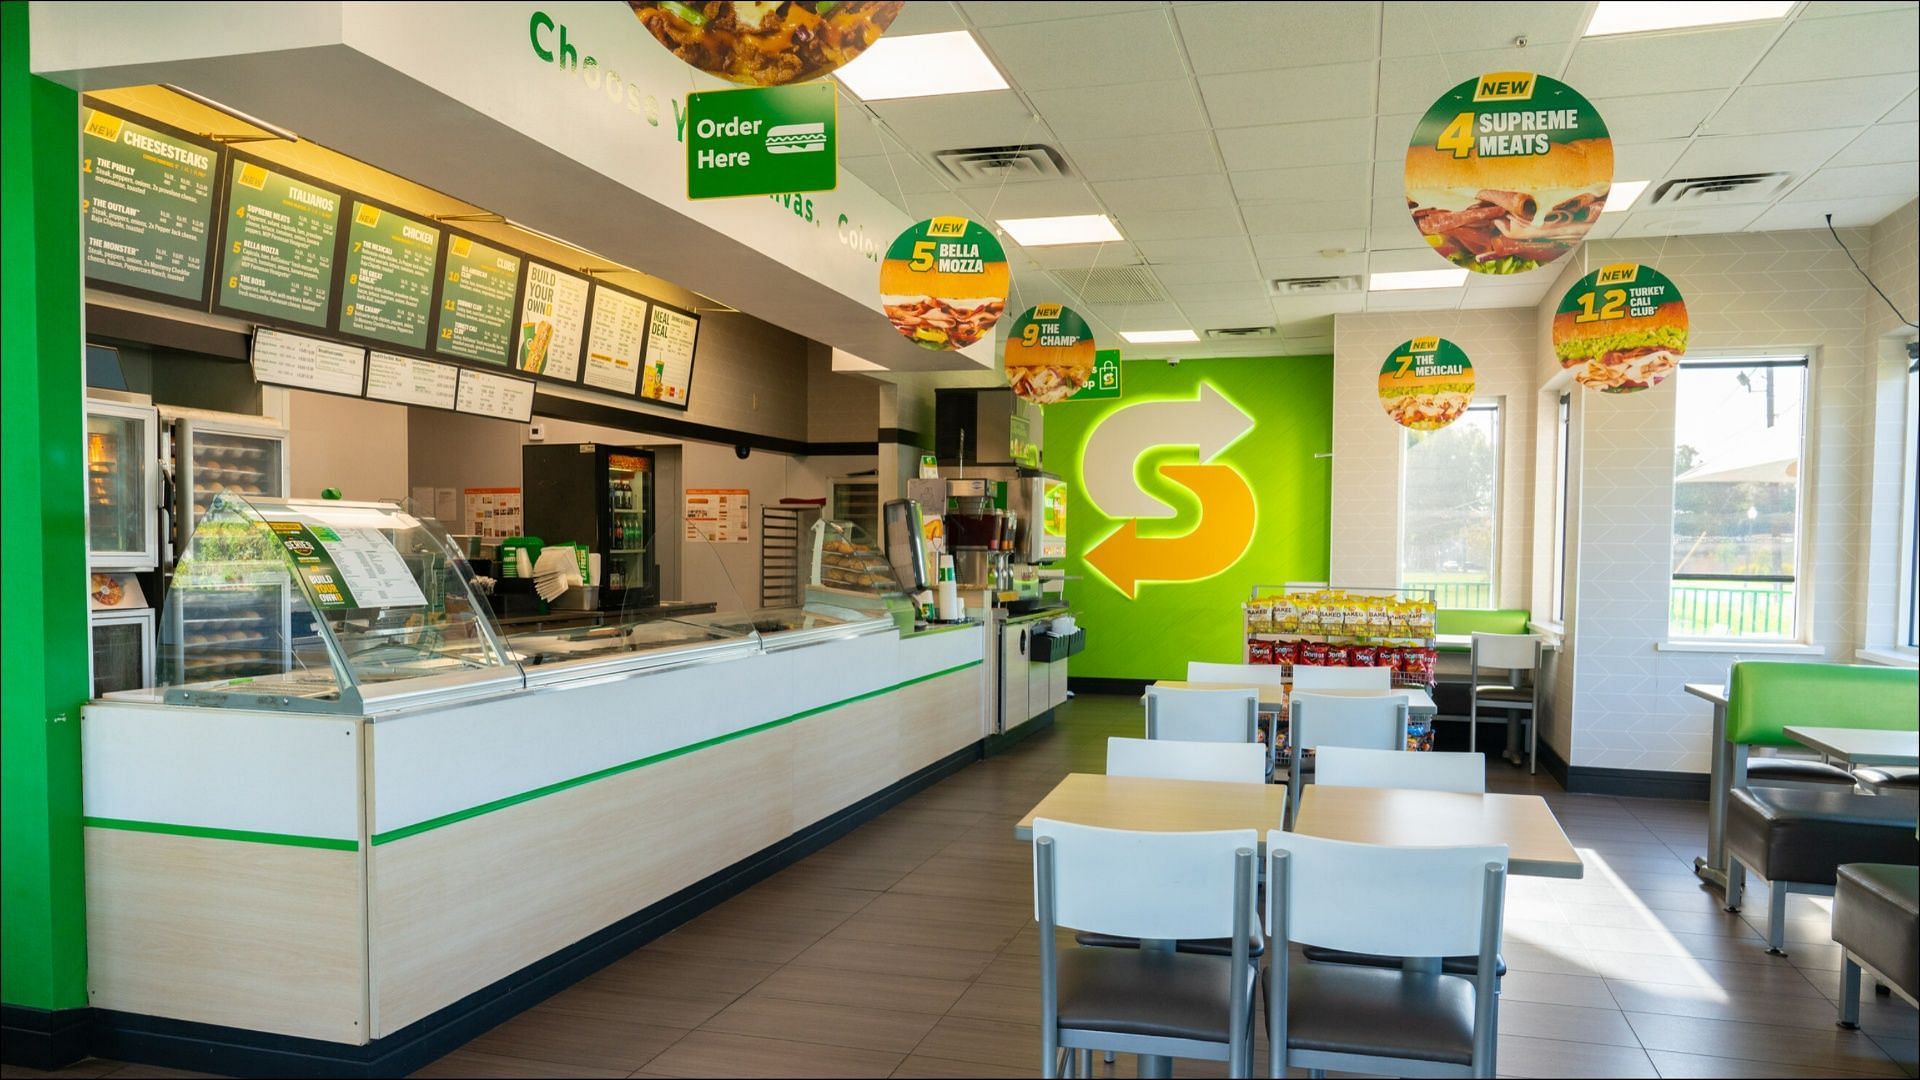 Subway makes the news of its undergoing acquisition by Roark Capital public (Image via PR Newswire)